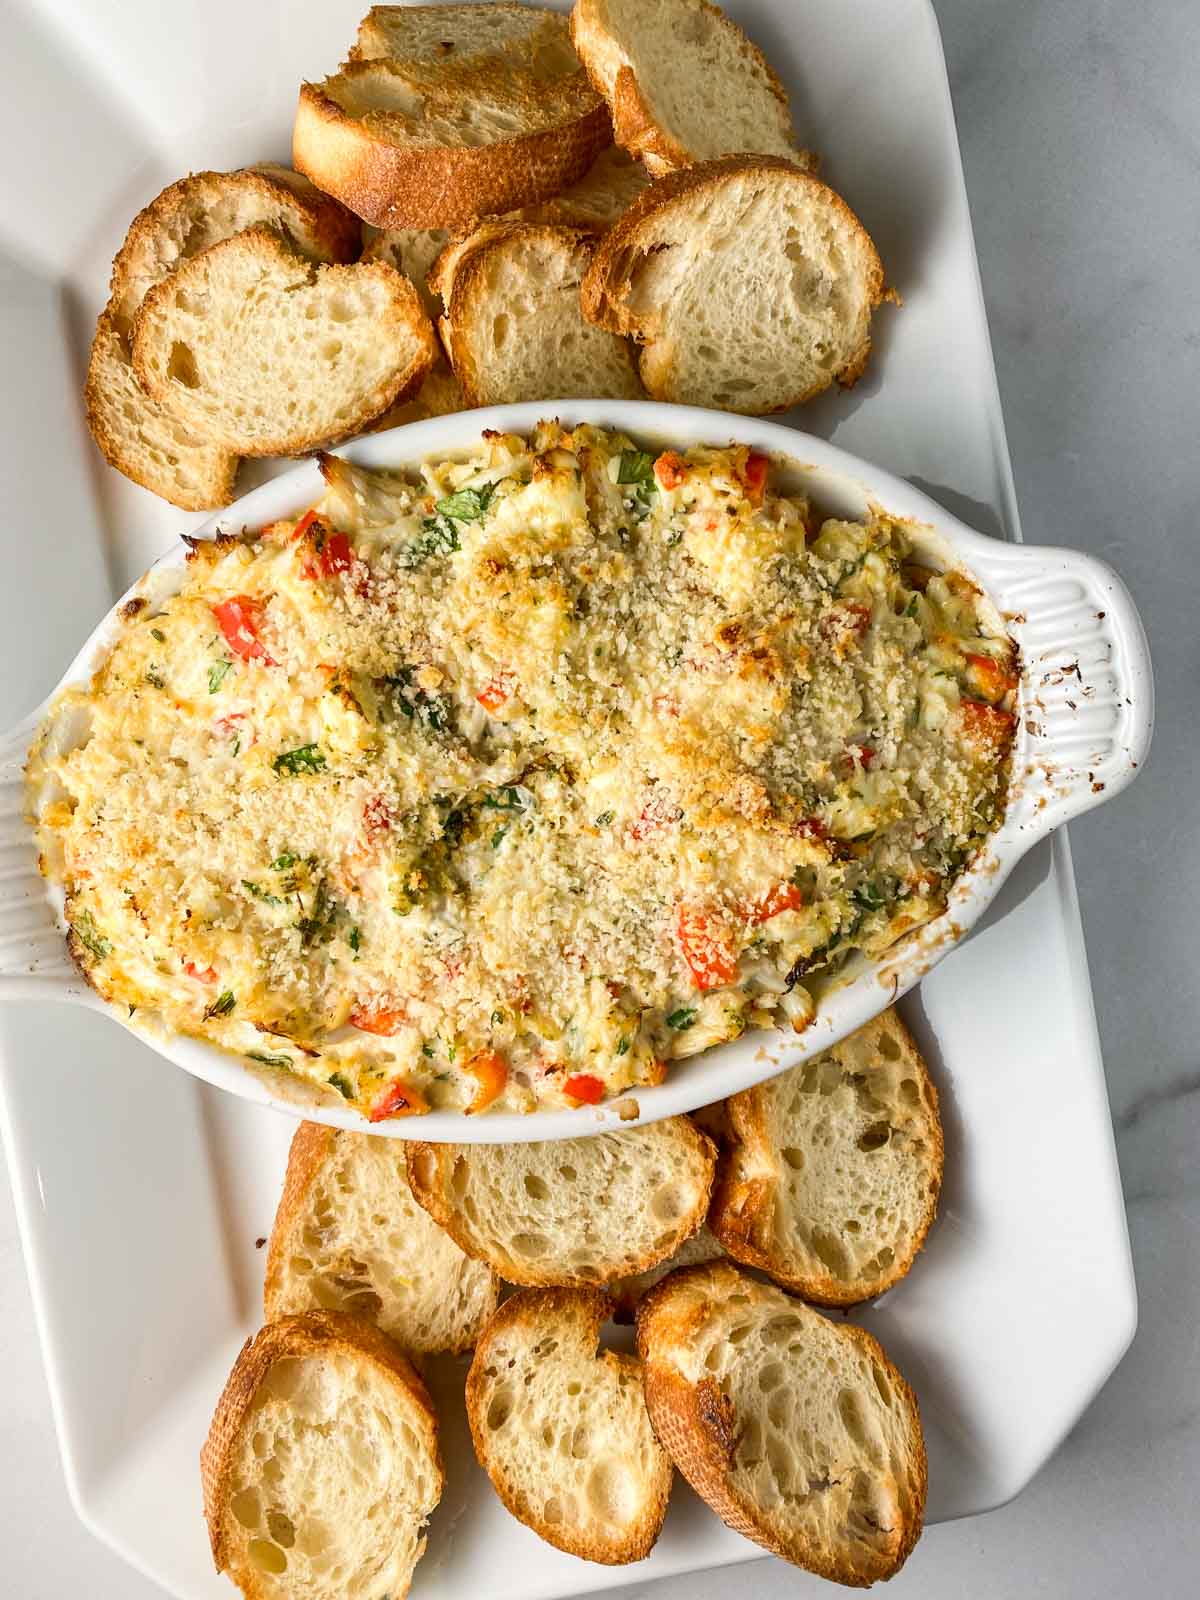 Crab dip in a white bowl with crostini around it.